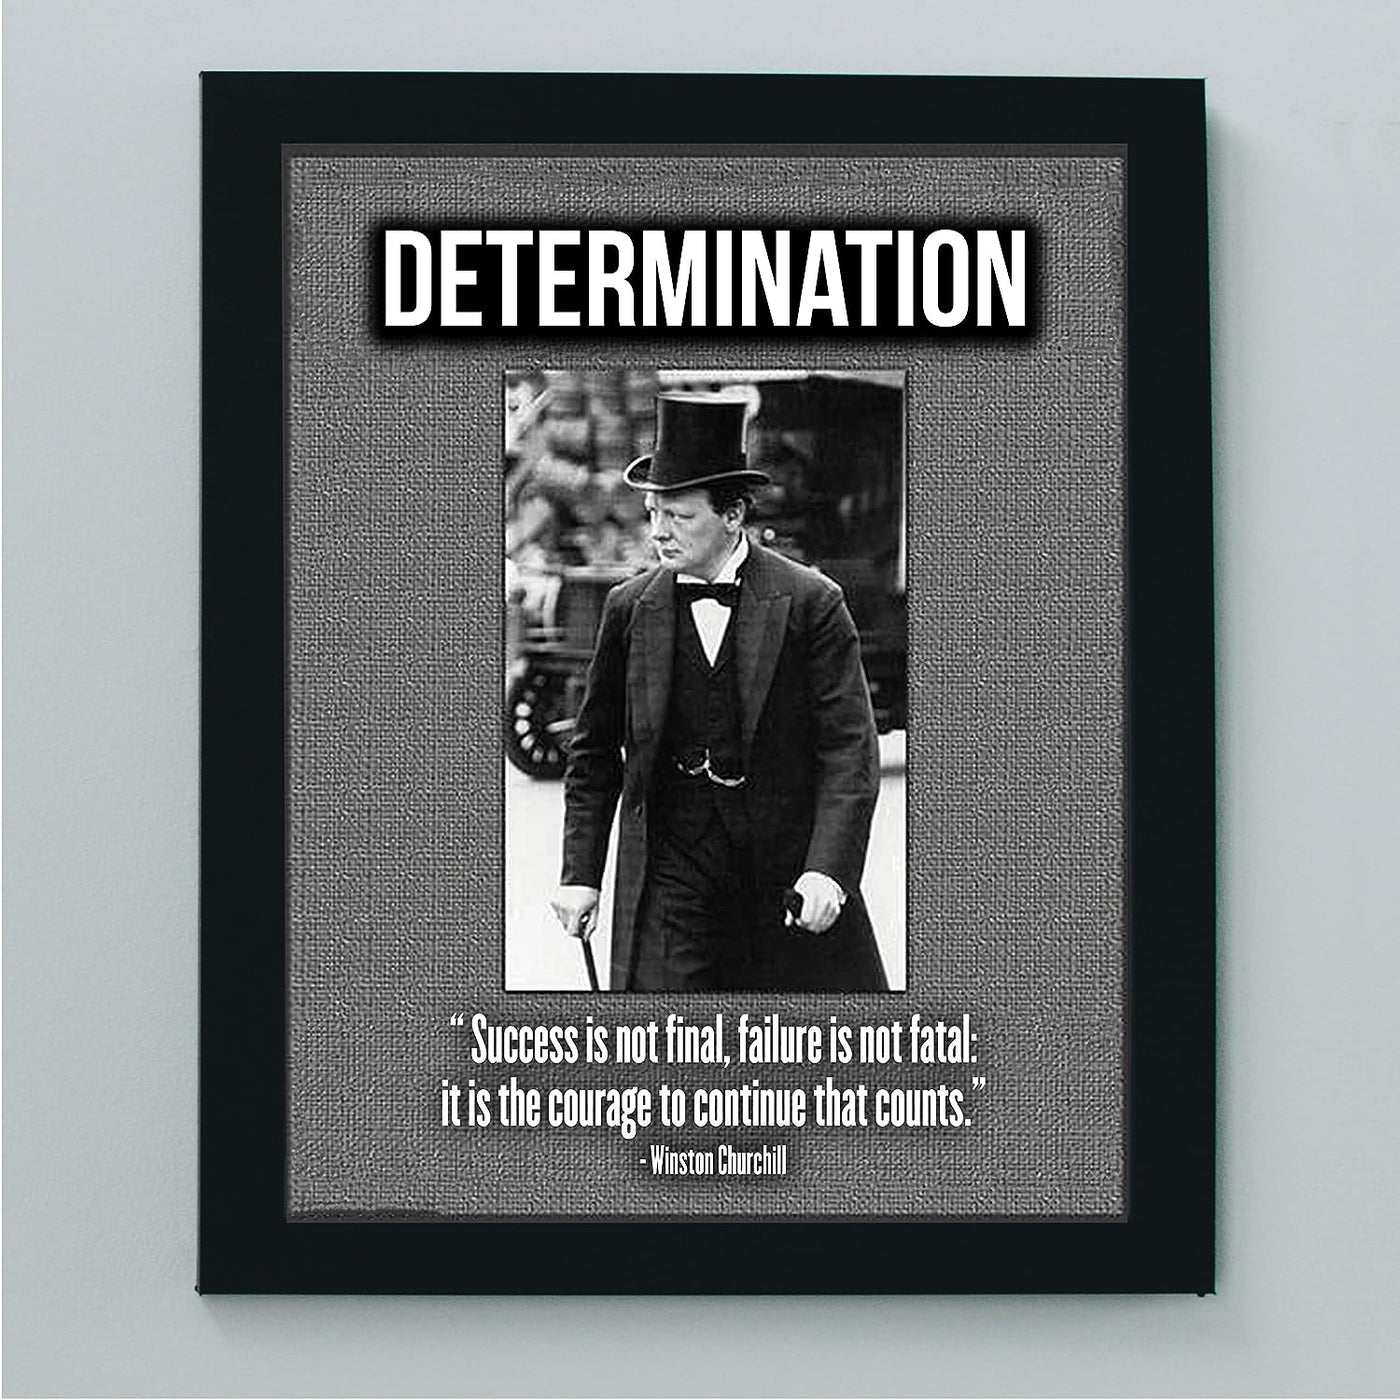 Winston Churchill Quotes-"Determination-Courage to Continue That Counts"-8 x 10" Motivational Portrait Wall Art Print-Ready to Frame. Retro Home-Office-Library Decor. Great Inspirational Gift!